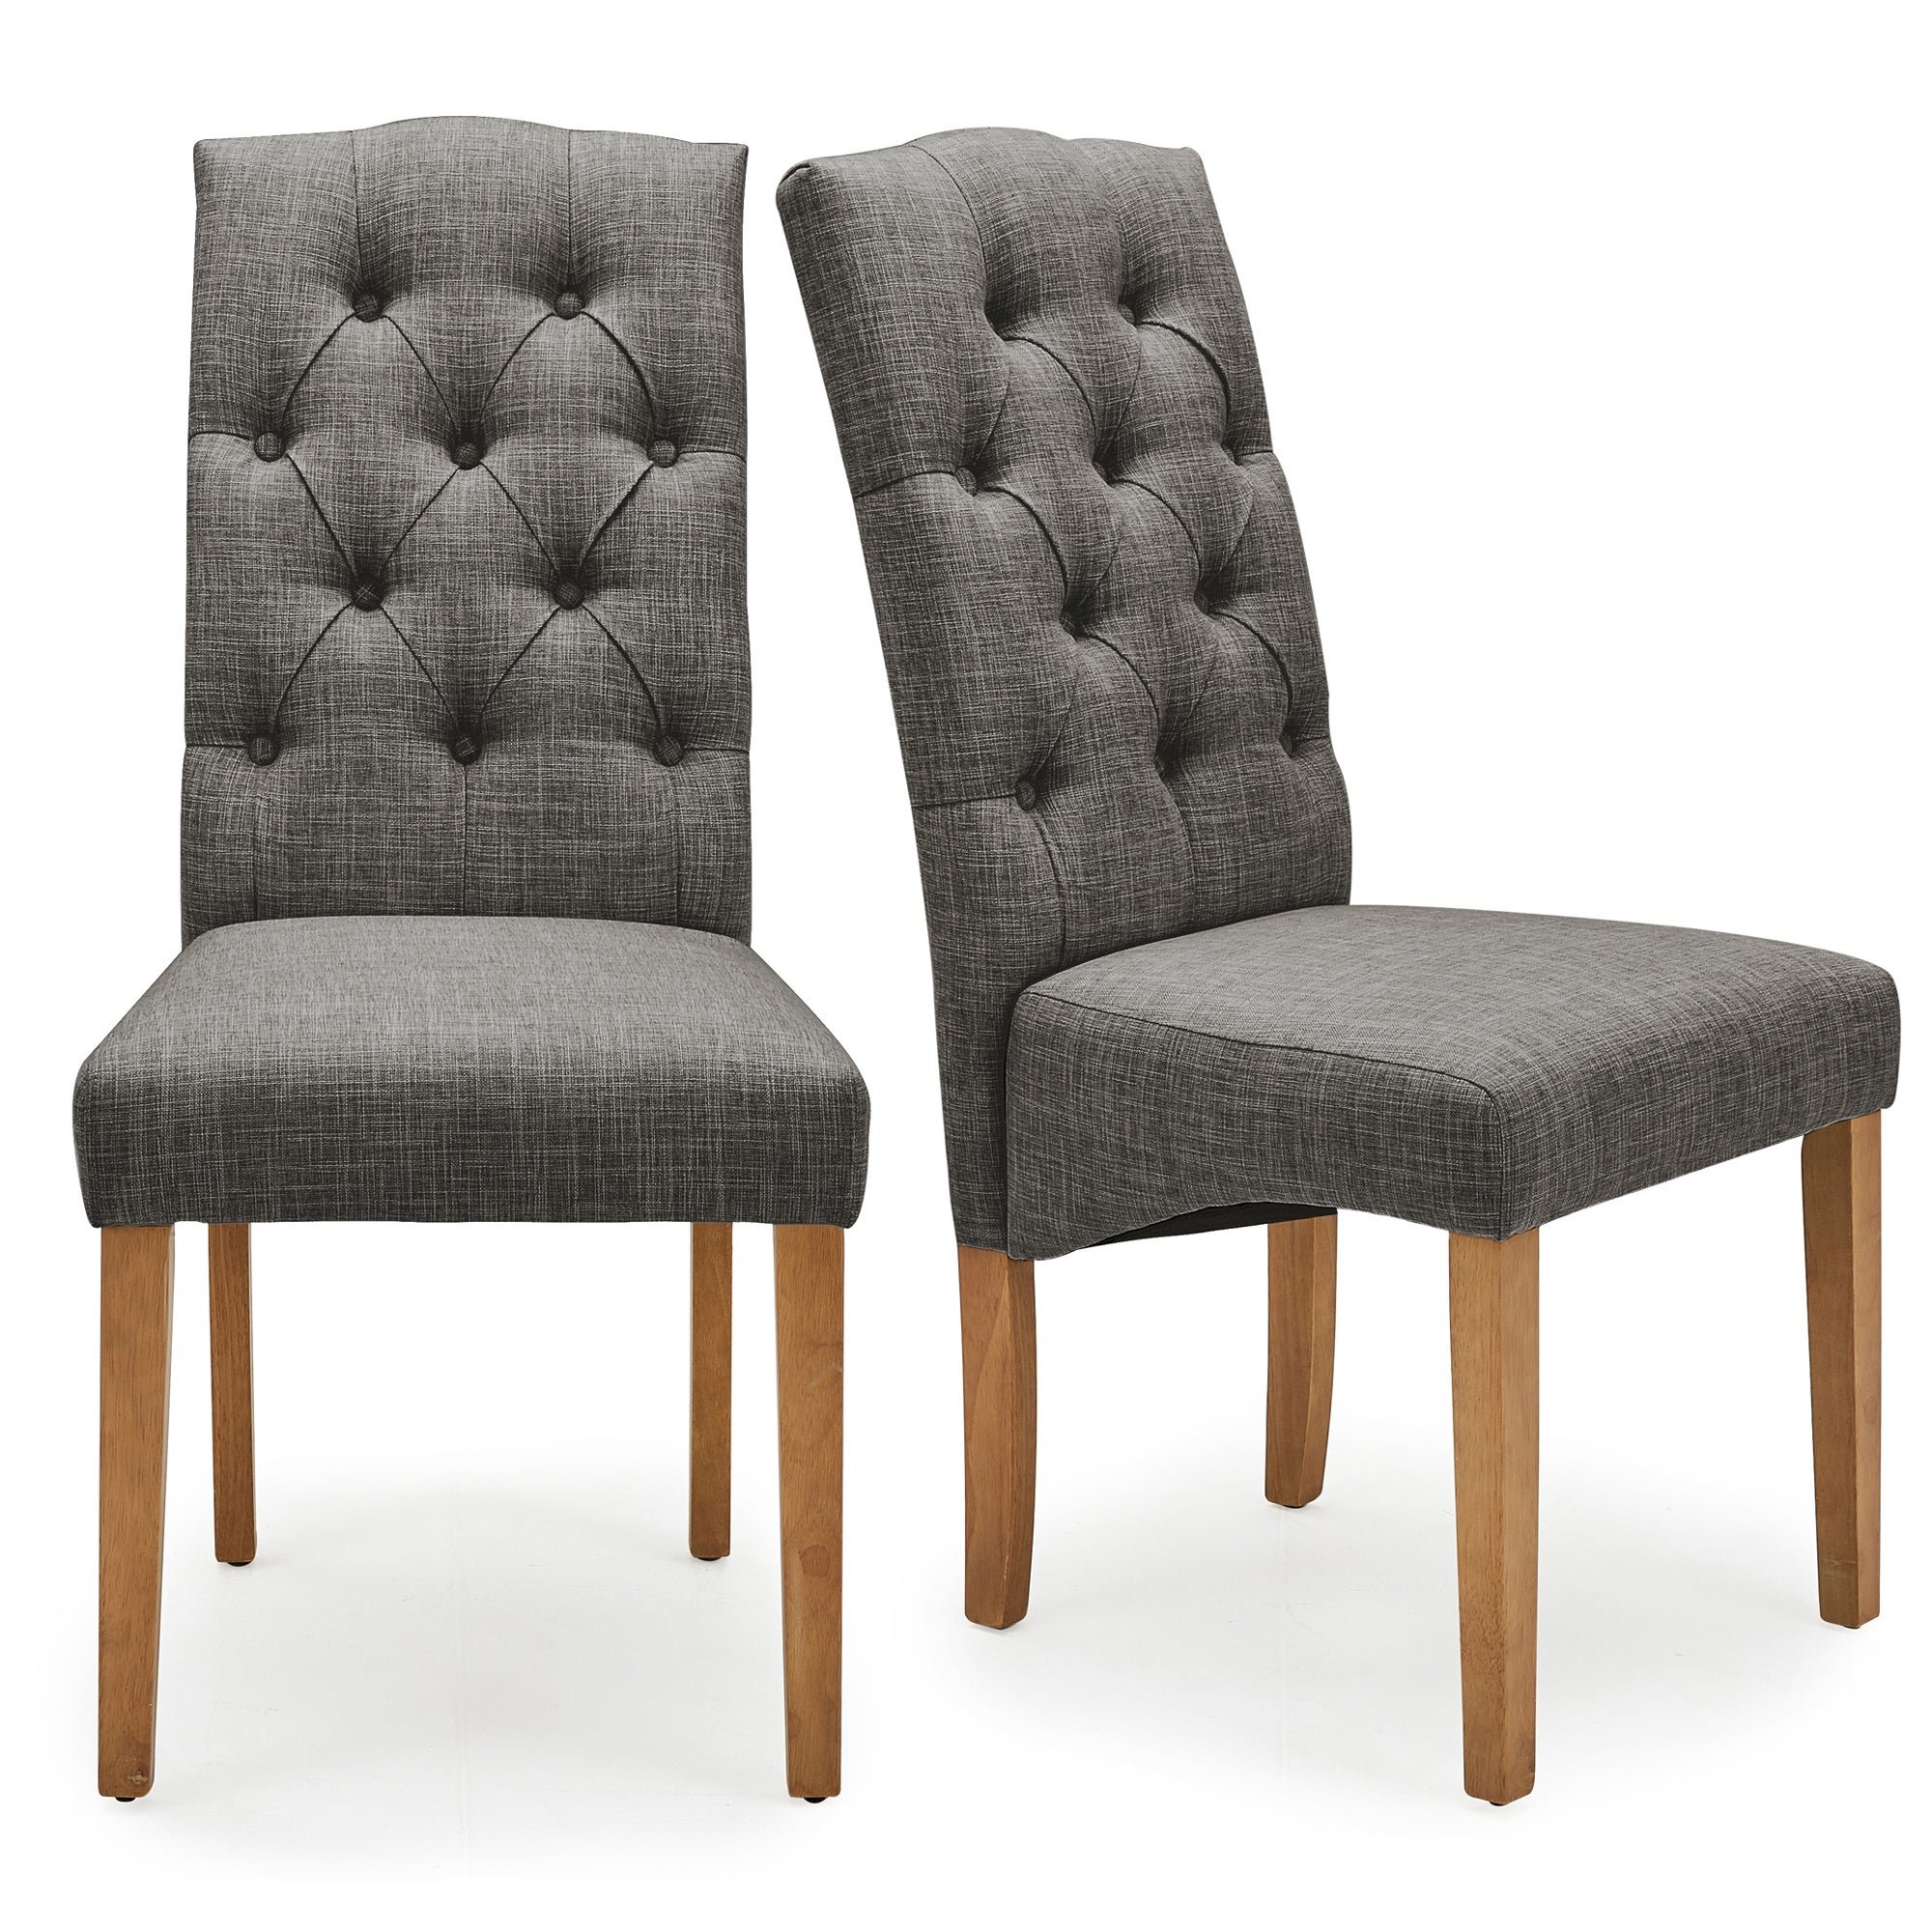 Darcy Set of 2 Dining Chairs Charcoal | Dunelm